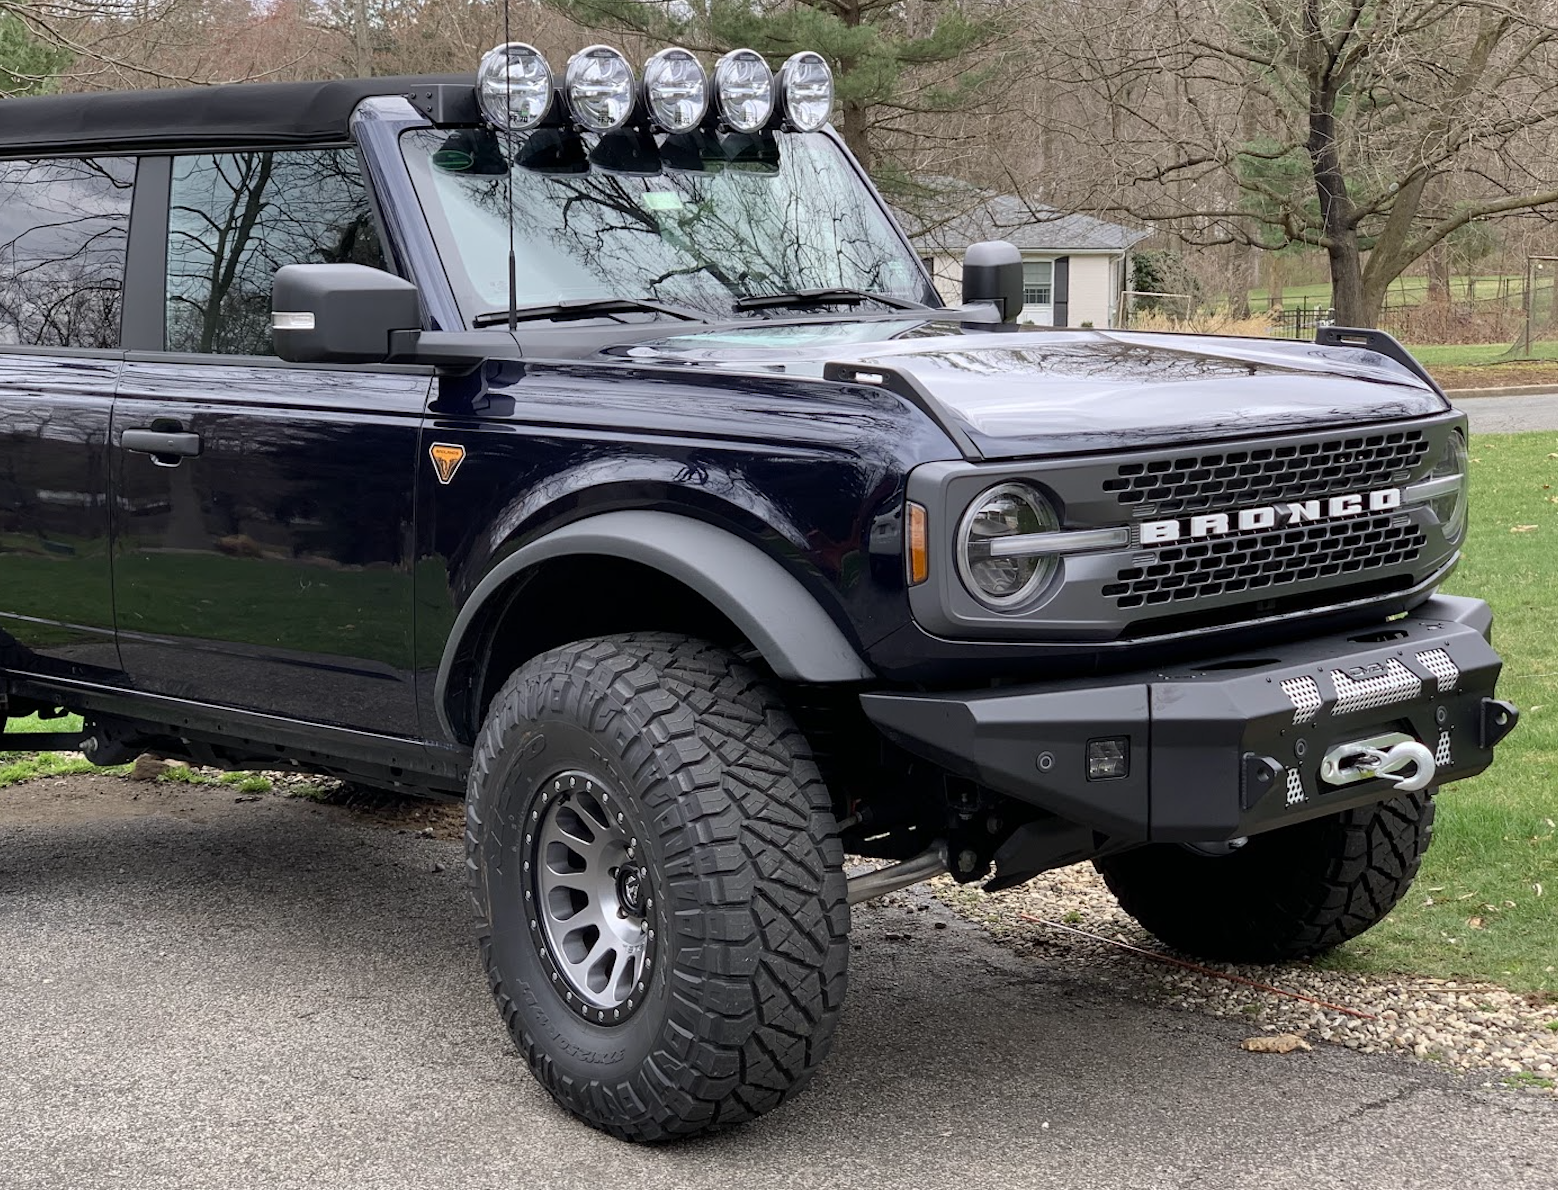 Ford Bronco Green Mountain Bronco Build on 37s, 3" Lift + more 1651048043629